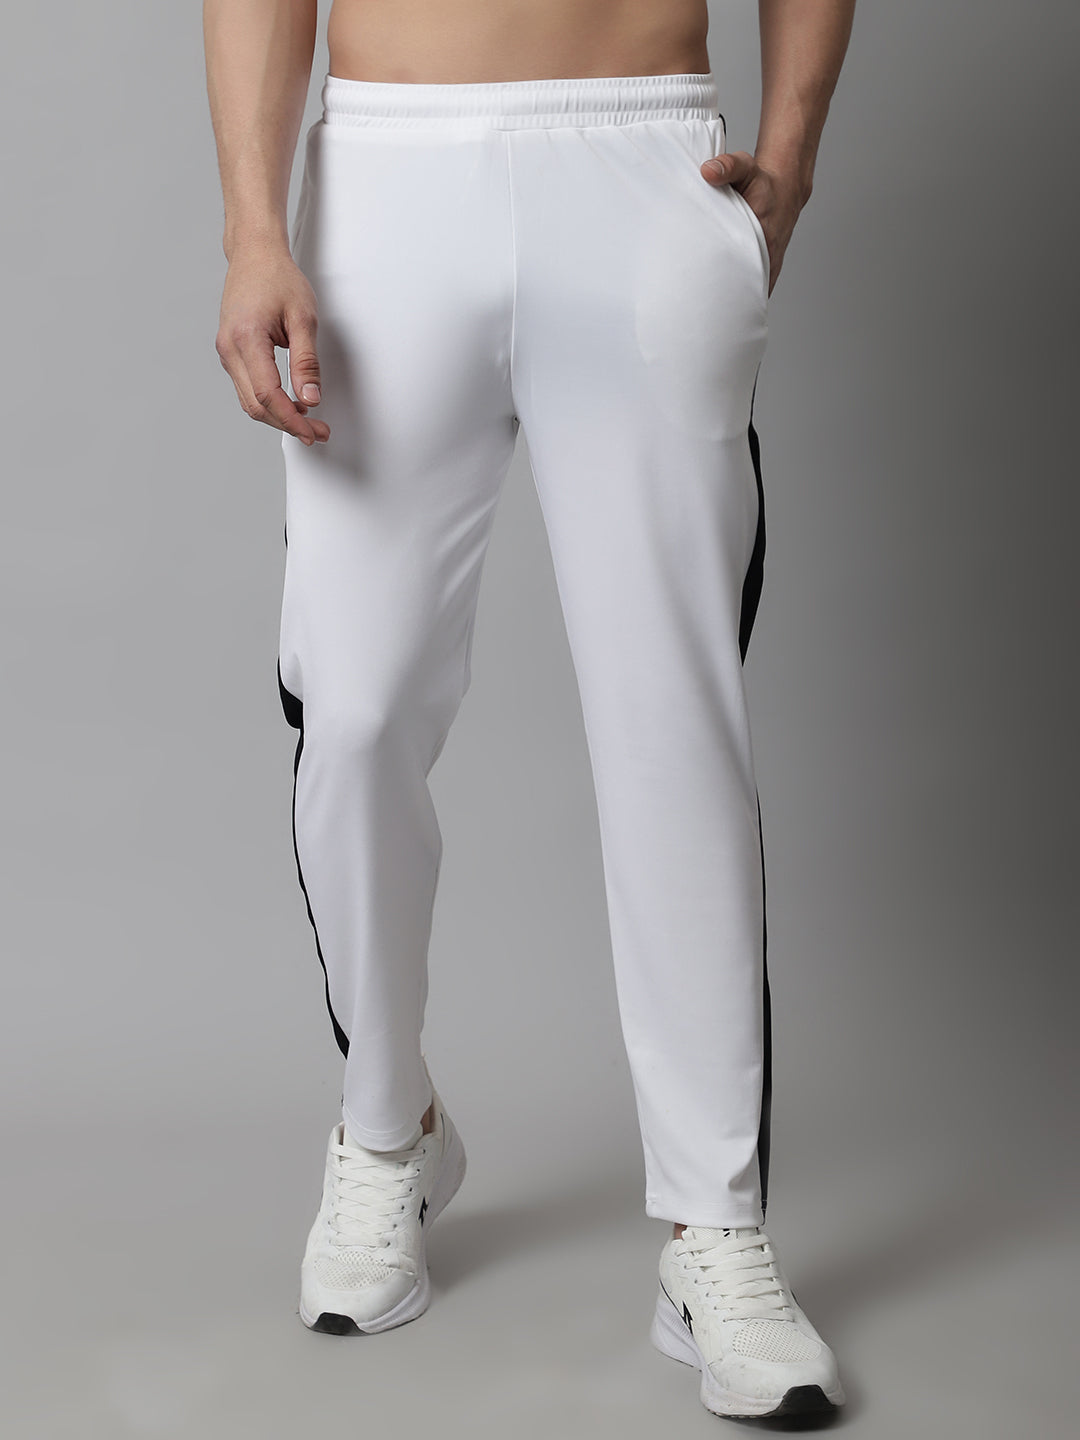 Men's White and Black Striped Streachable Lycra Trackpants